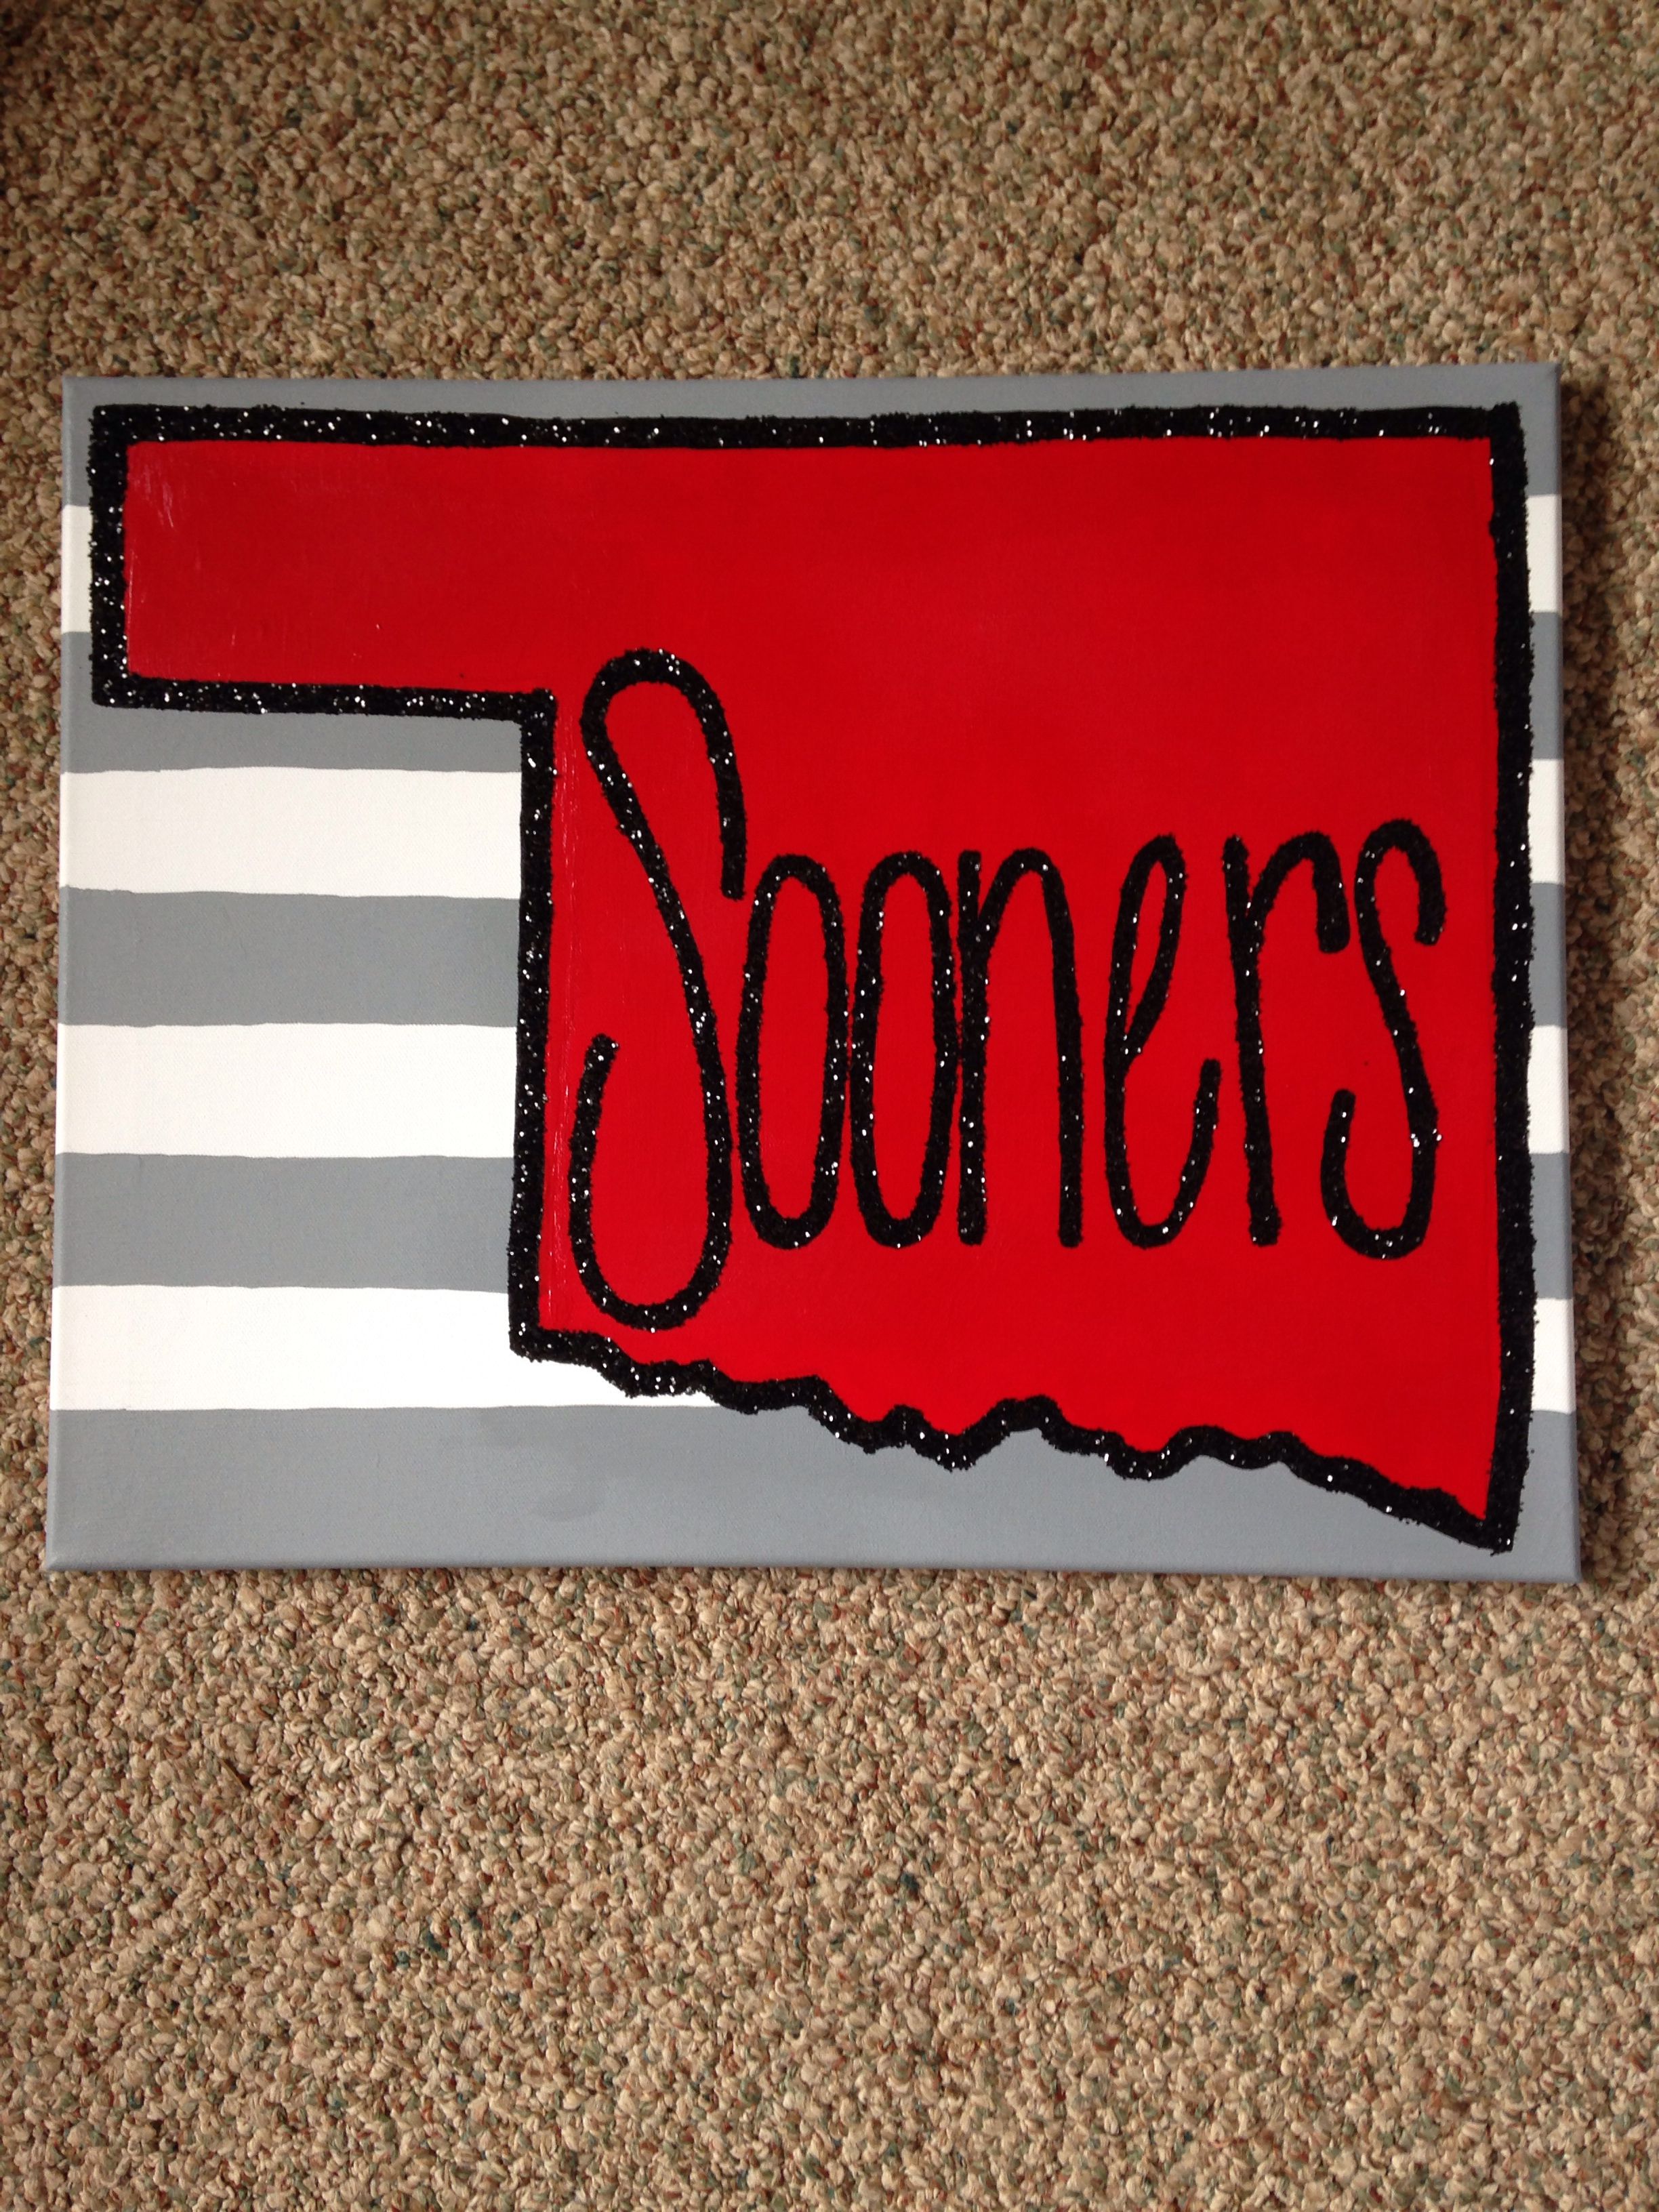 Oklahoma Sooners canvas White and gray striped background red 2448x3264